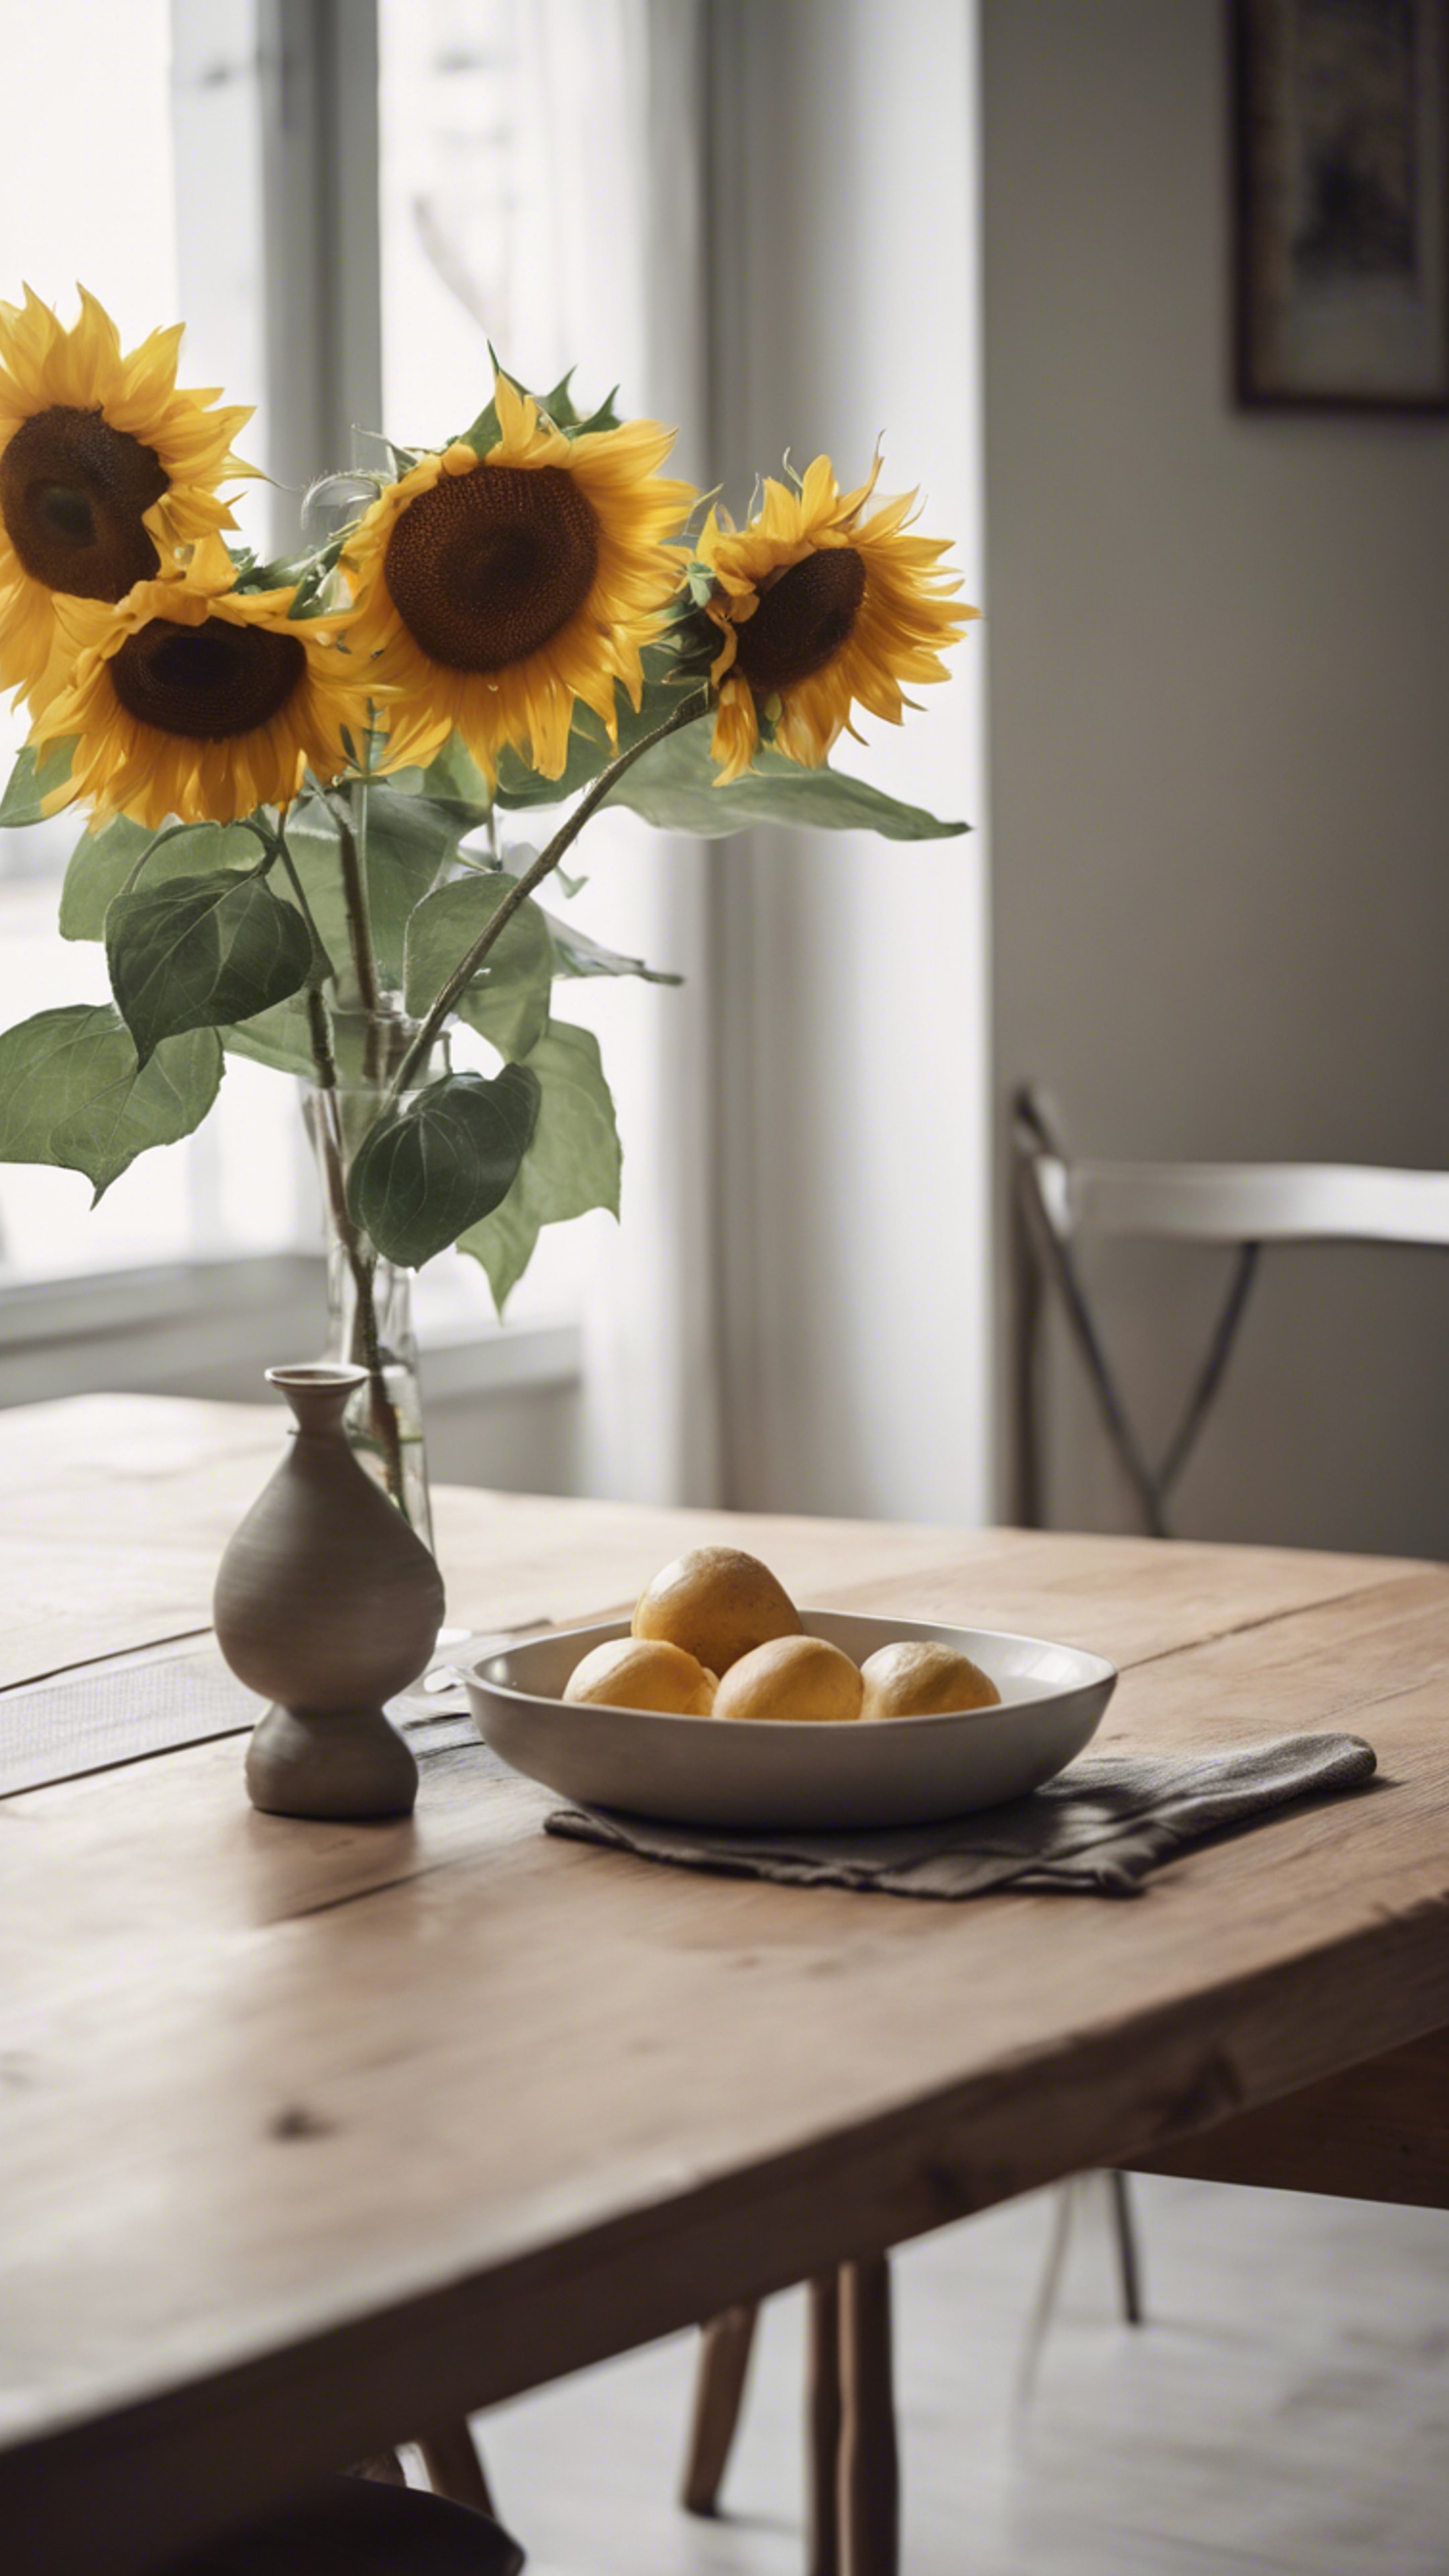 A minimalist dining area with a wooden table, set with simple china and a vase of sunflowers. Шпалери[7db5290c1b5a4d25ba08]